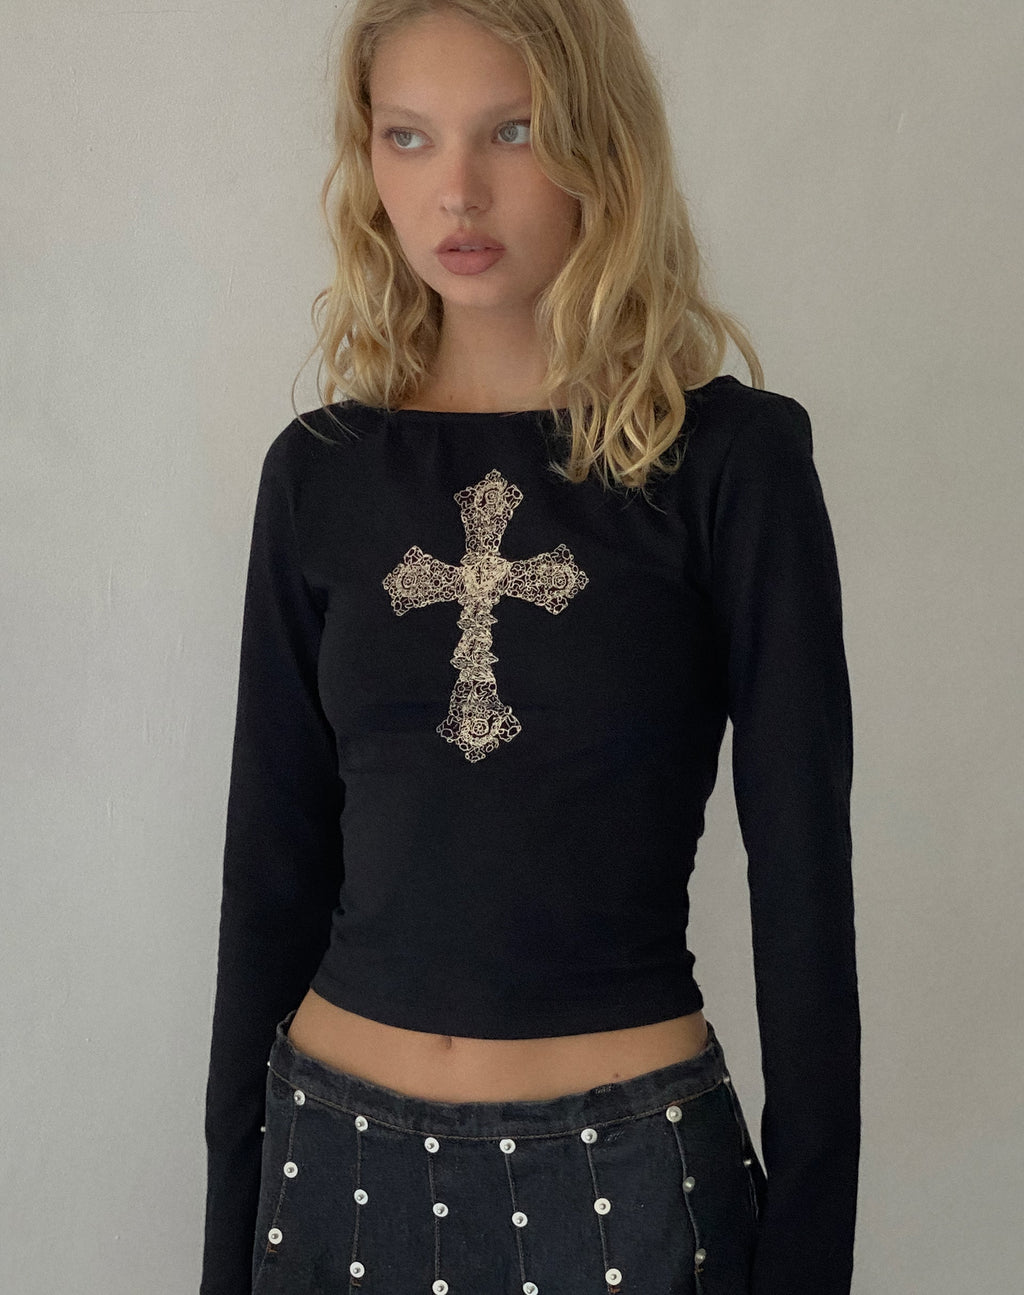 Amabon Top in Black with Cross Motif